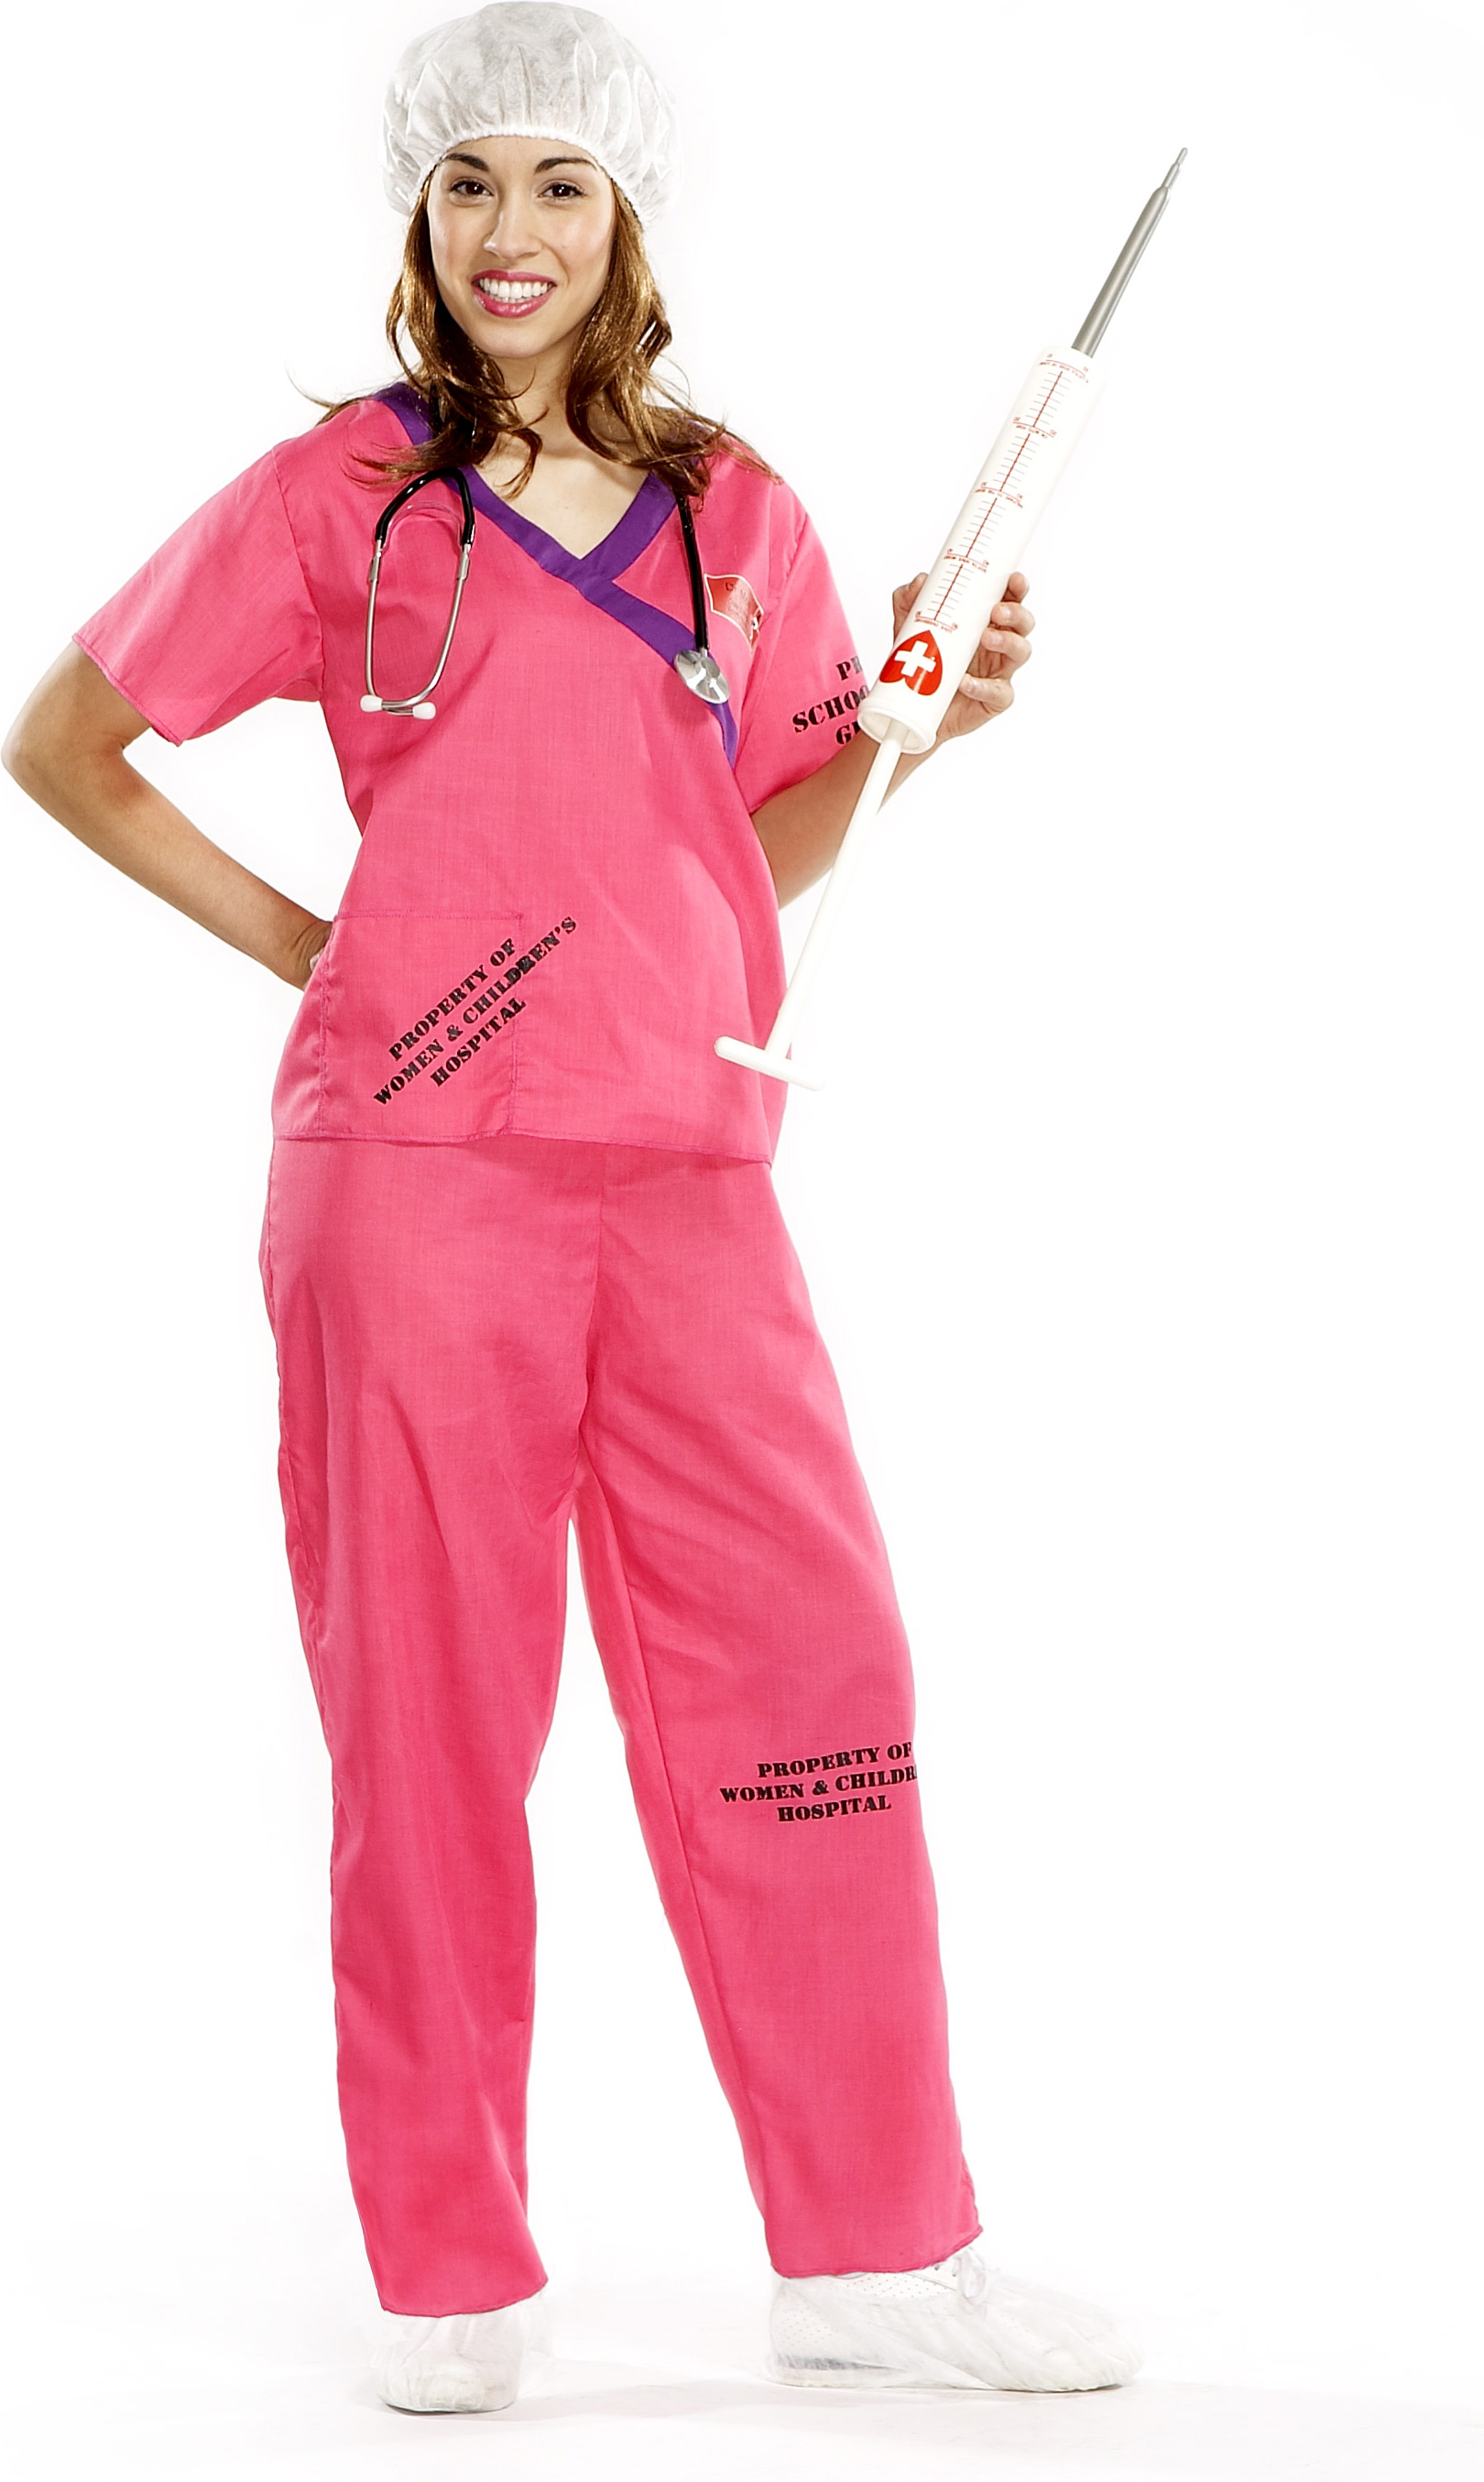 AMC Women's Dr. Mom Adult Costume - One-Size (8-14)